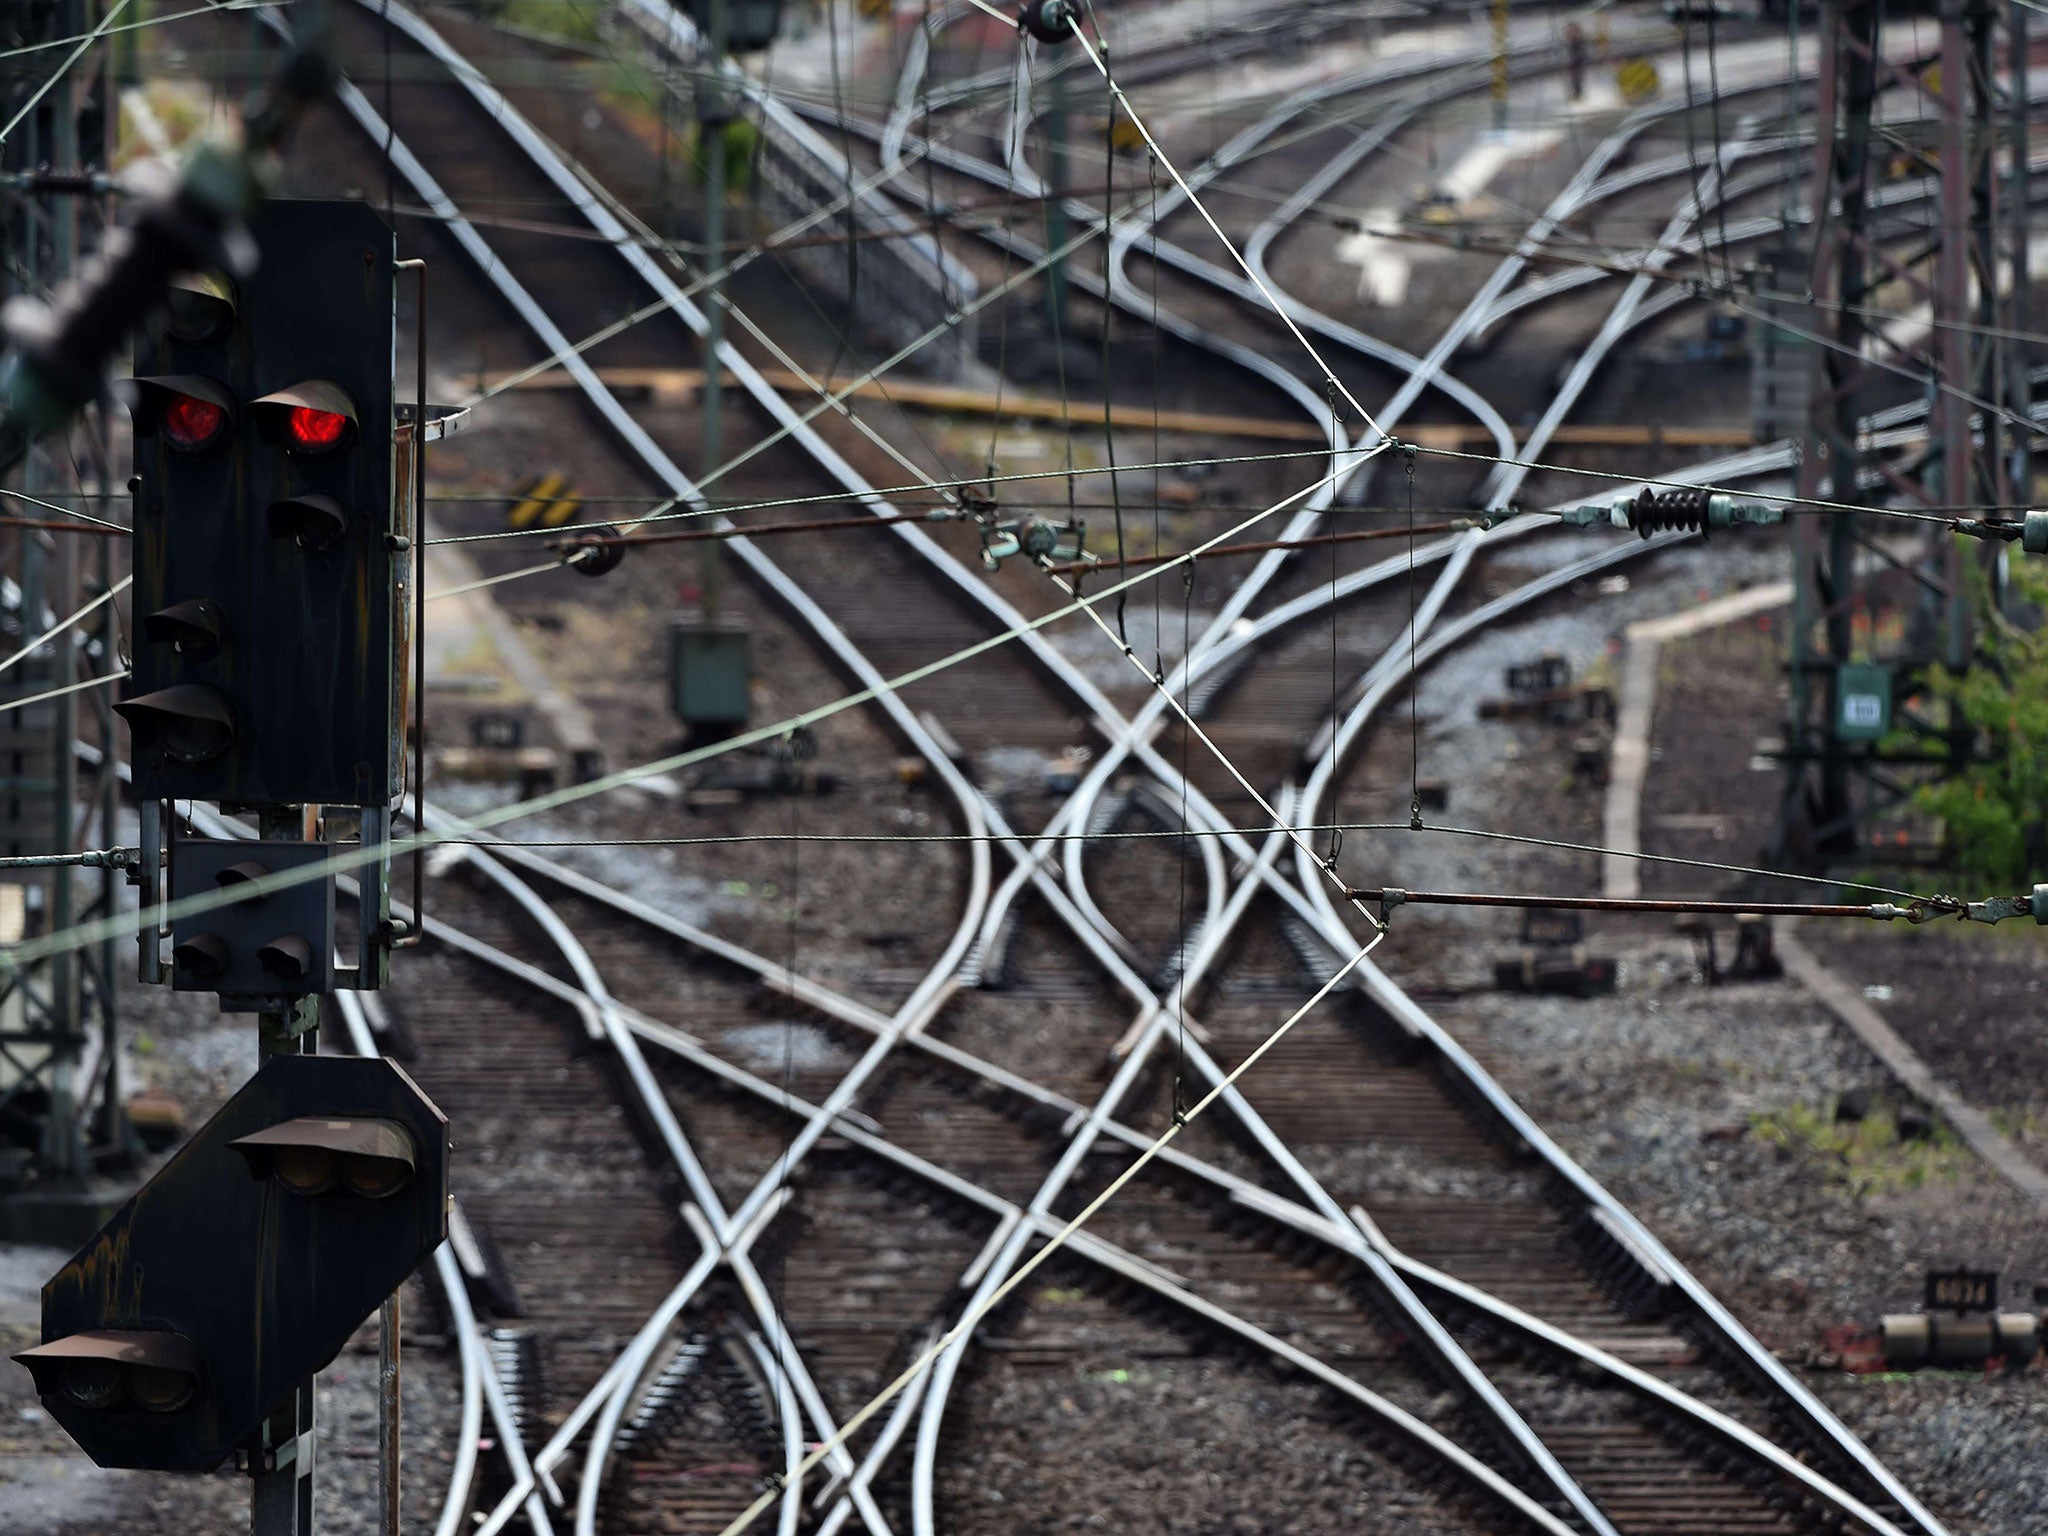 Network Rail’s income was £246m lower than last year